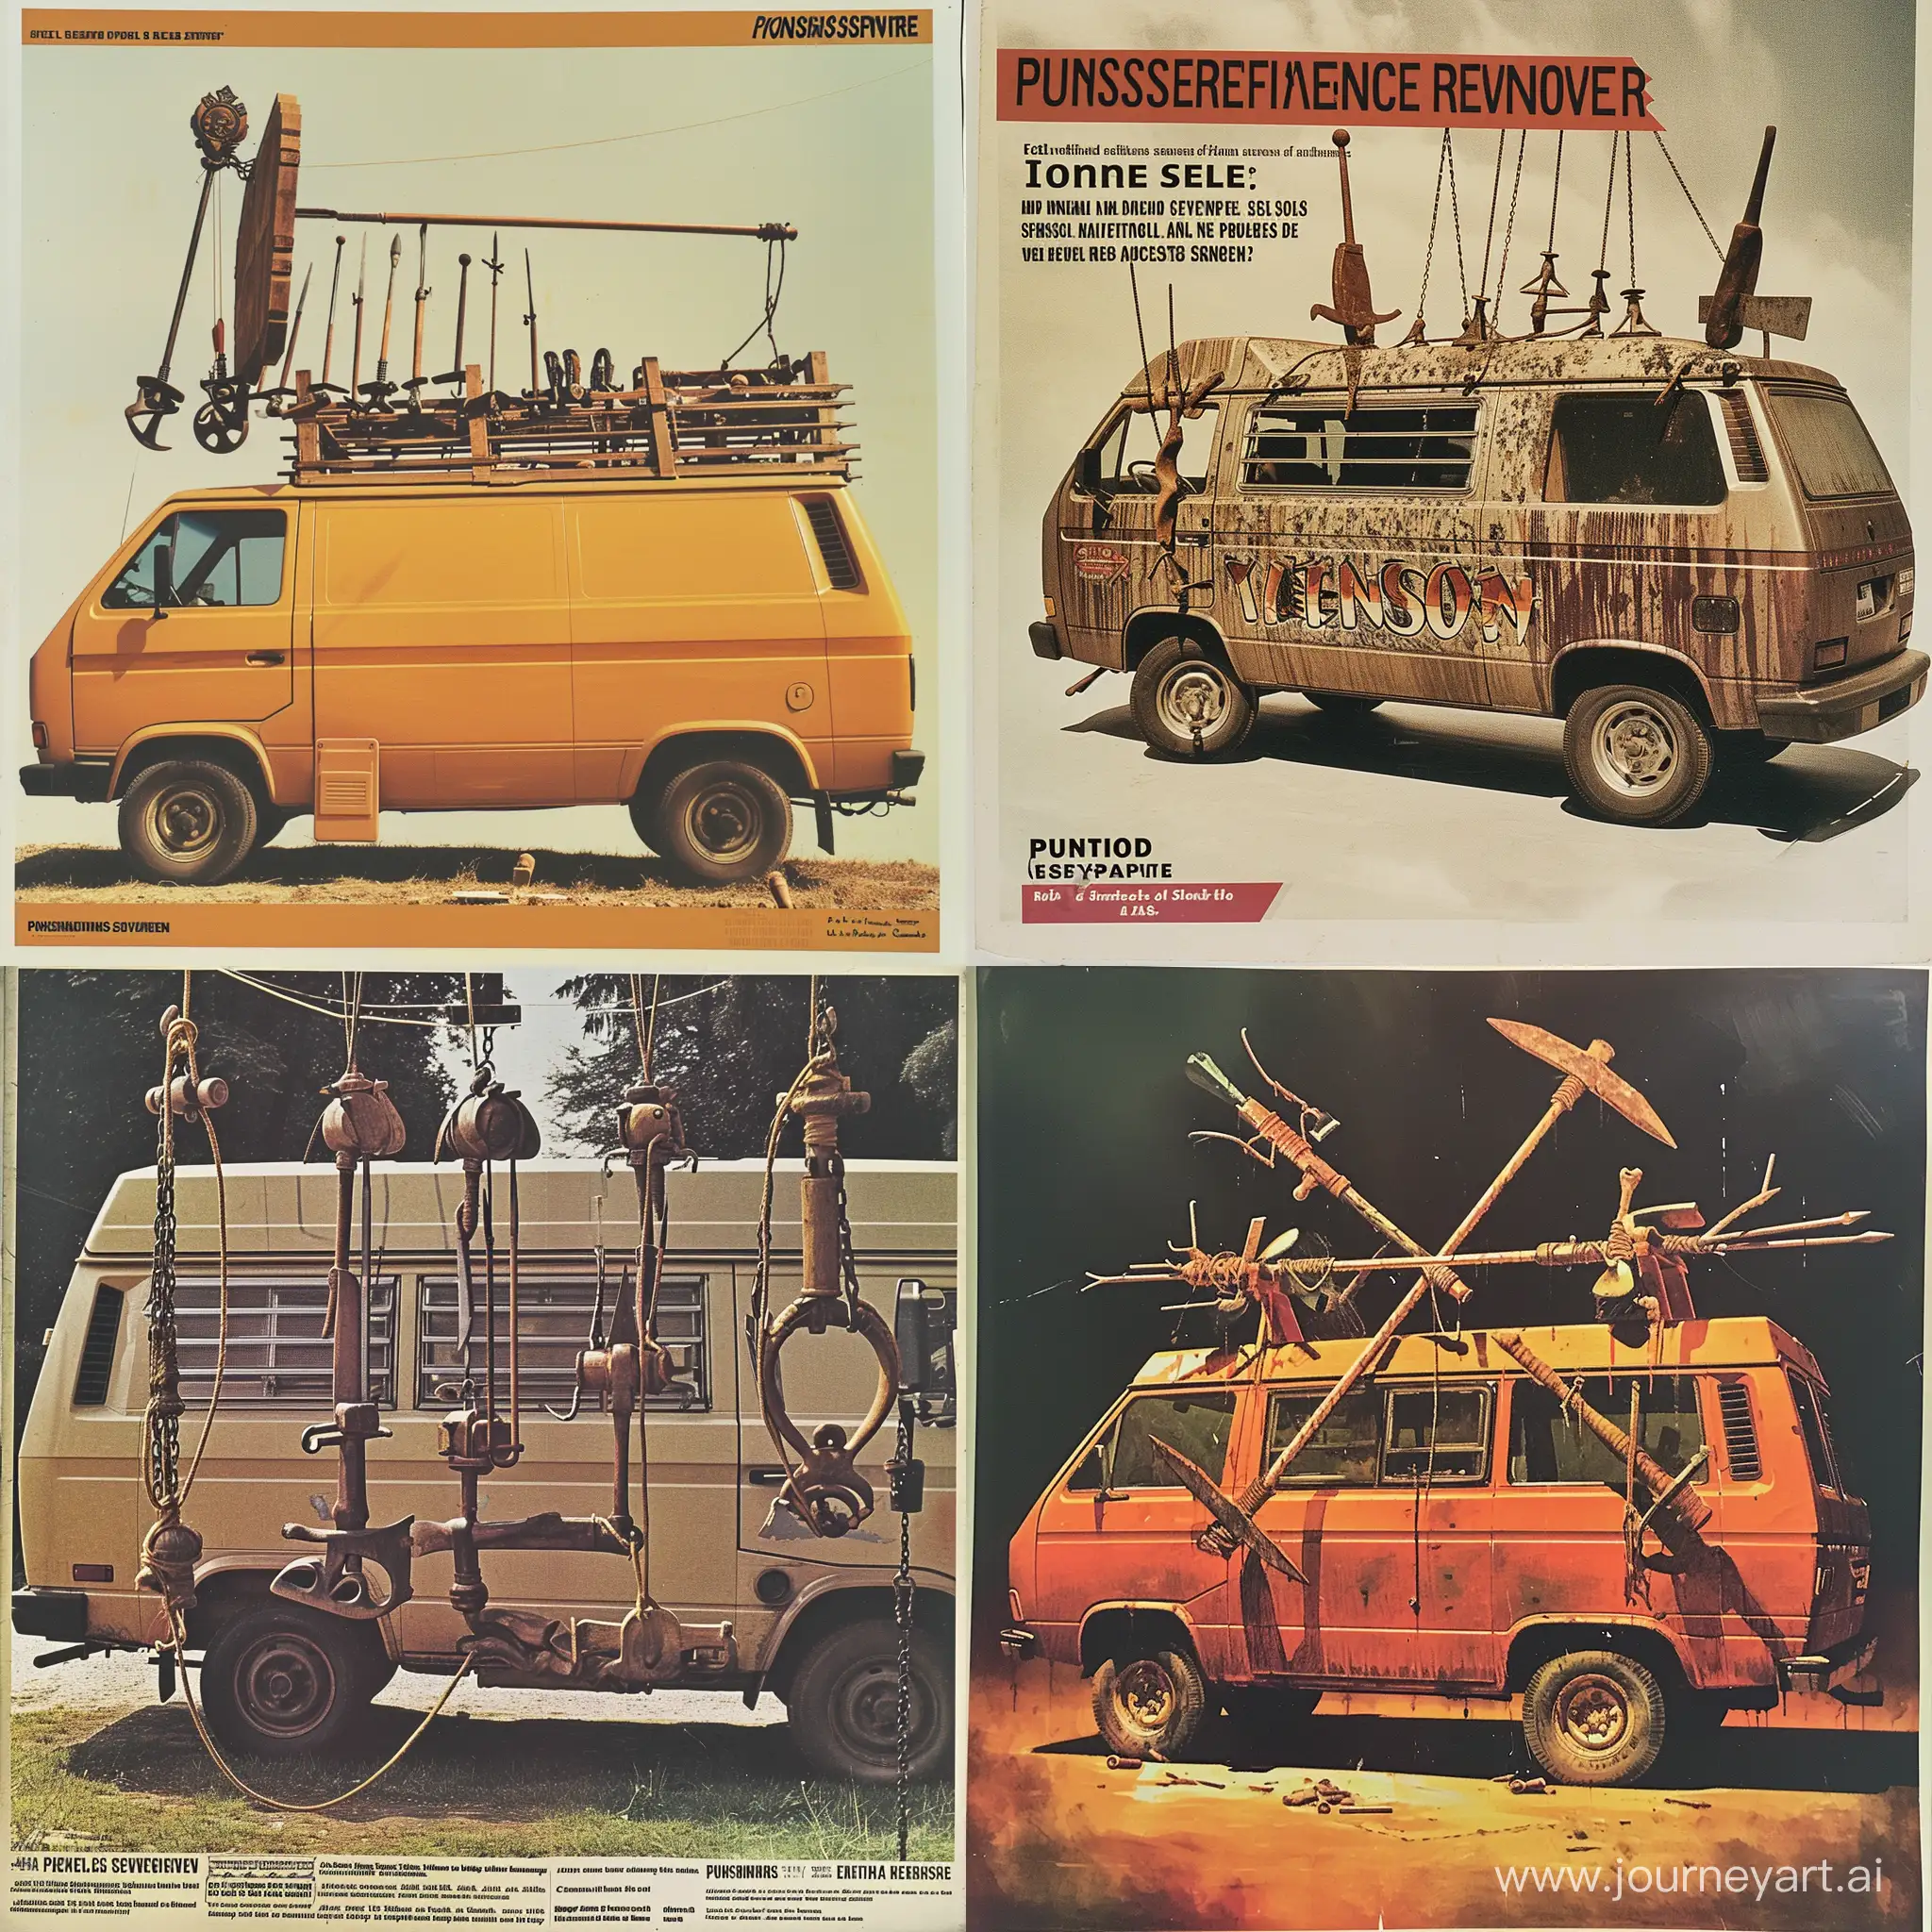 1980s ad for delivery service of a van offering ((PUNISHMENT SERVICES)) with medieval tools used for punishment and unpleasantness 